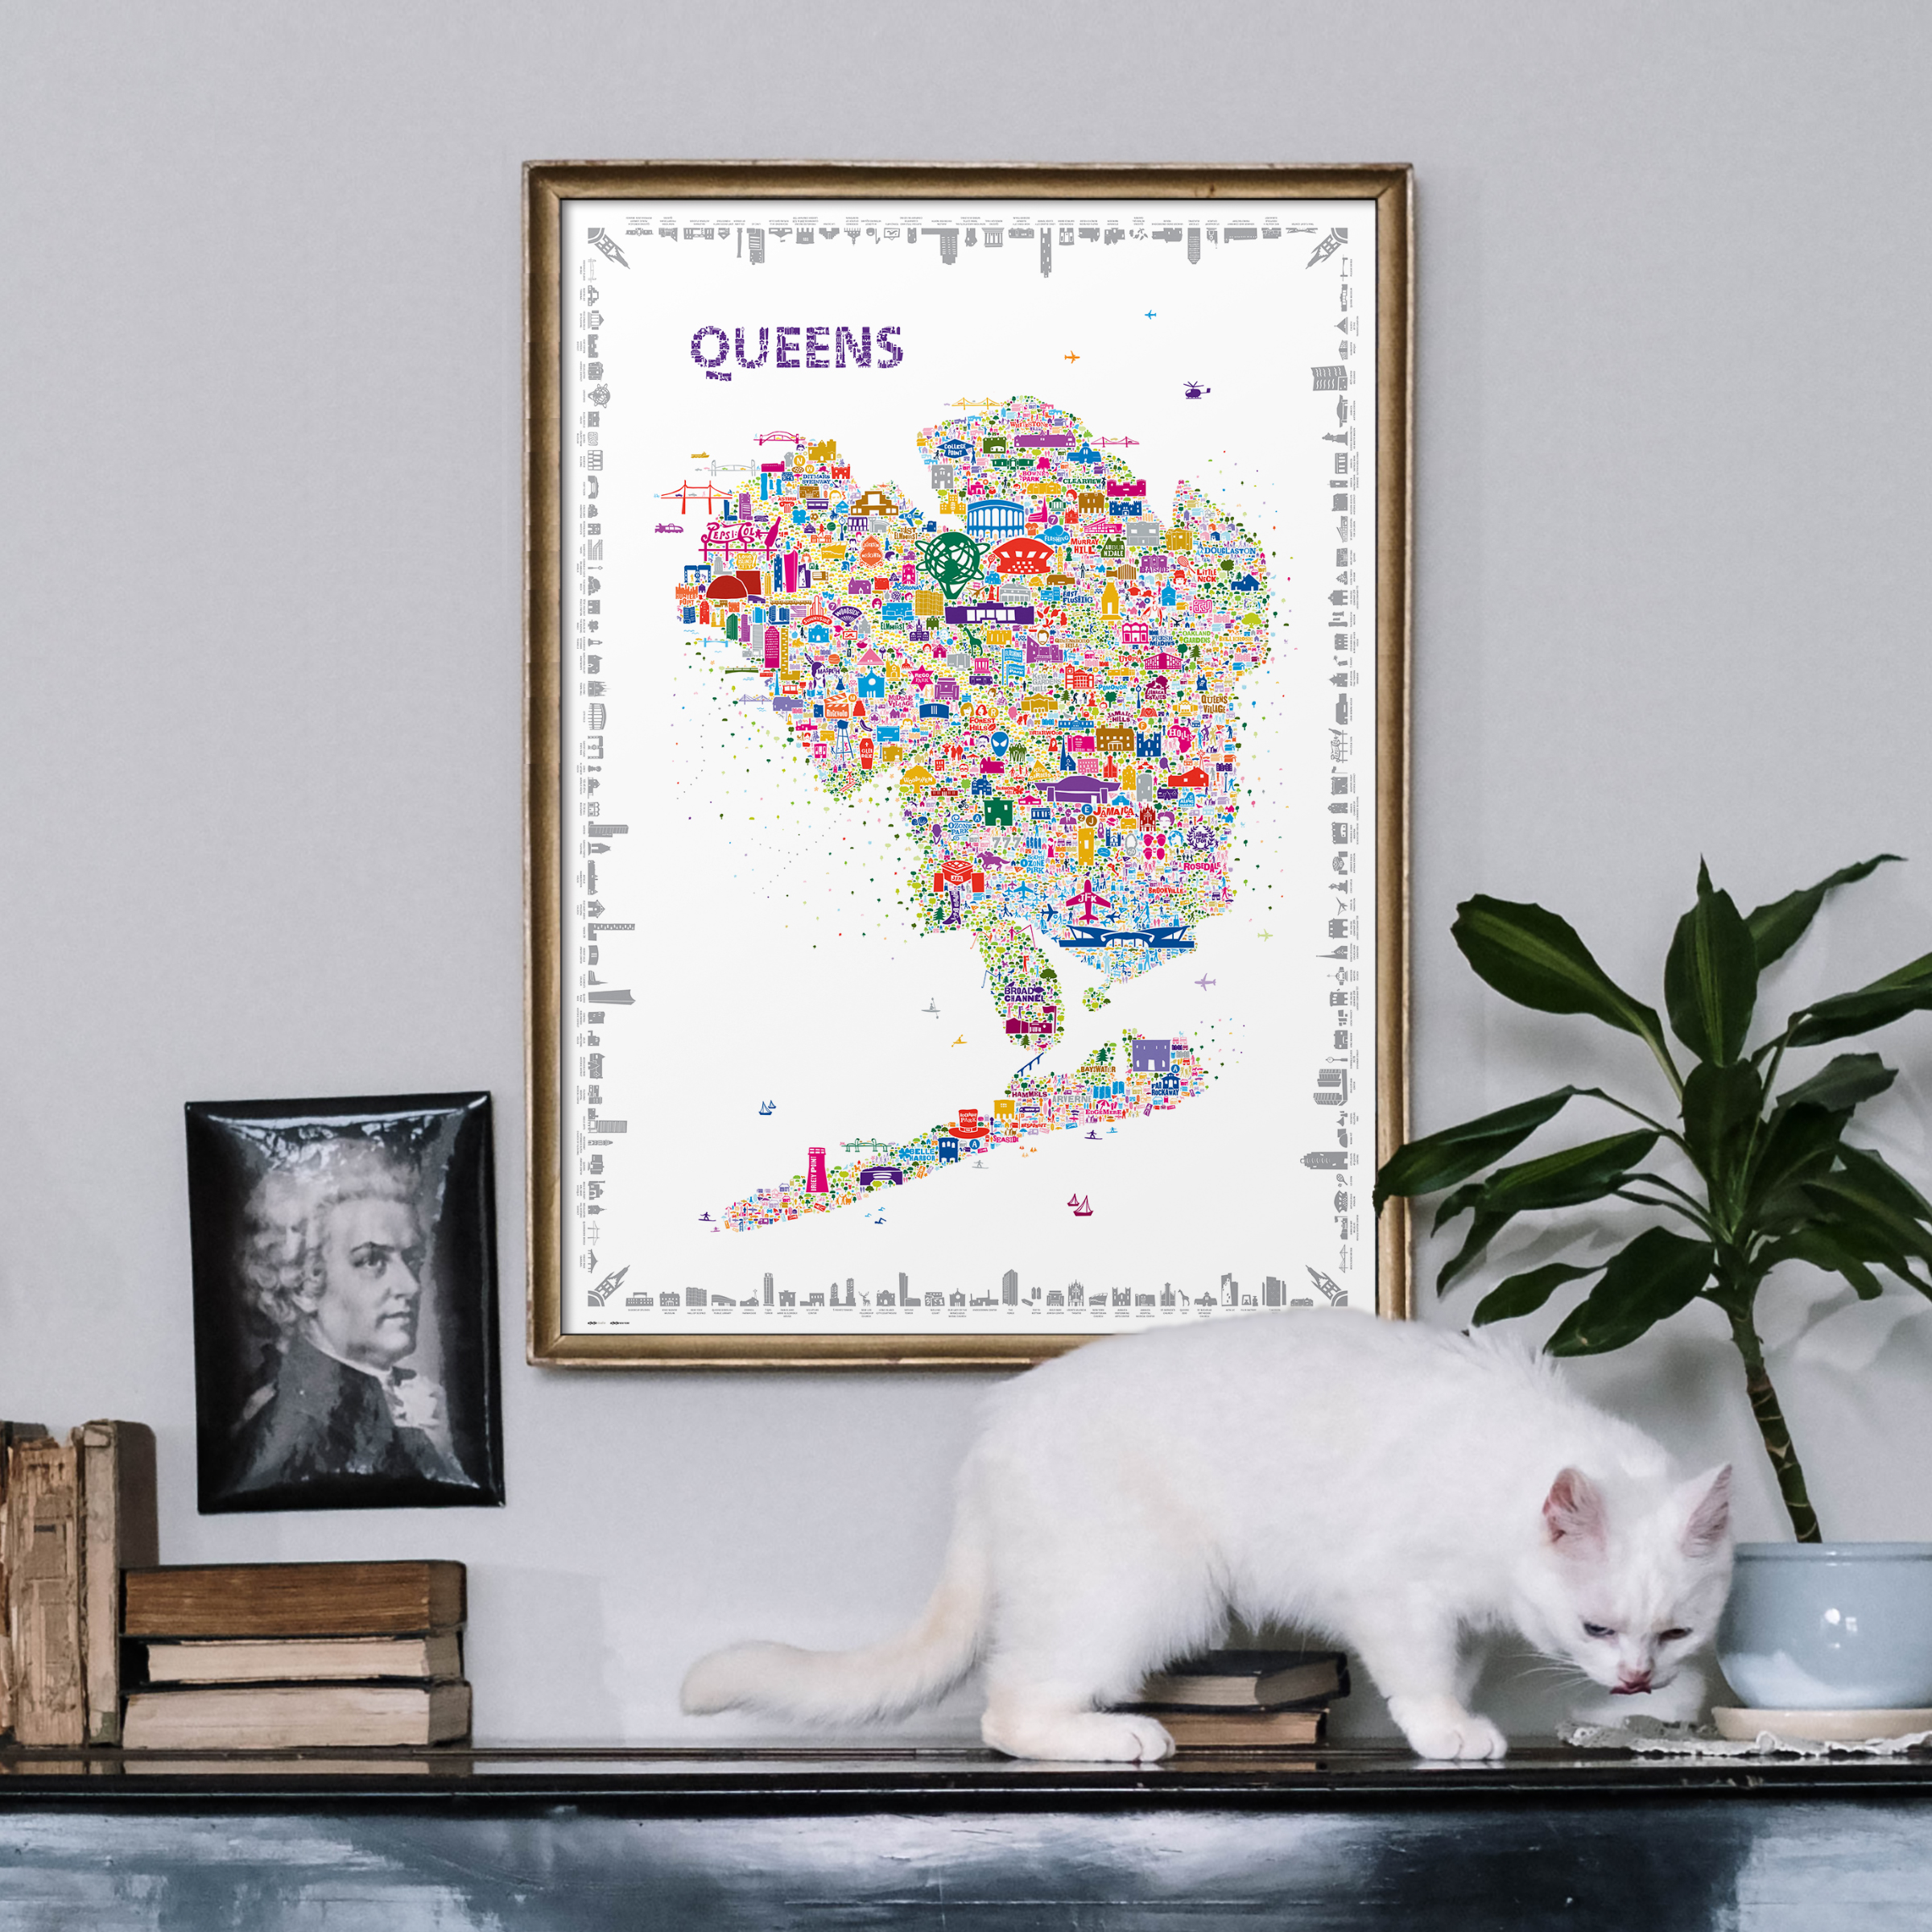 https://alfalfanewyork.com/wp-content/uploads/2023/08/Alfalfa-NY-Queens-NYC-Map-Modern-Poster-Print-for-Living-Room-Bedroom-Office-and-Kitchen-Artwork-Prints-Aesthetic-Style-Home-Decor-Posters-Wall-Art-Gift-Large-Vintage-Cool-WallArt.jpg